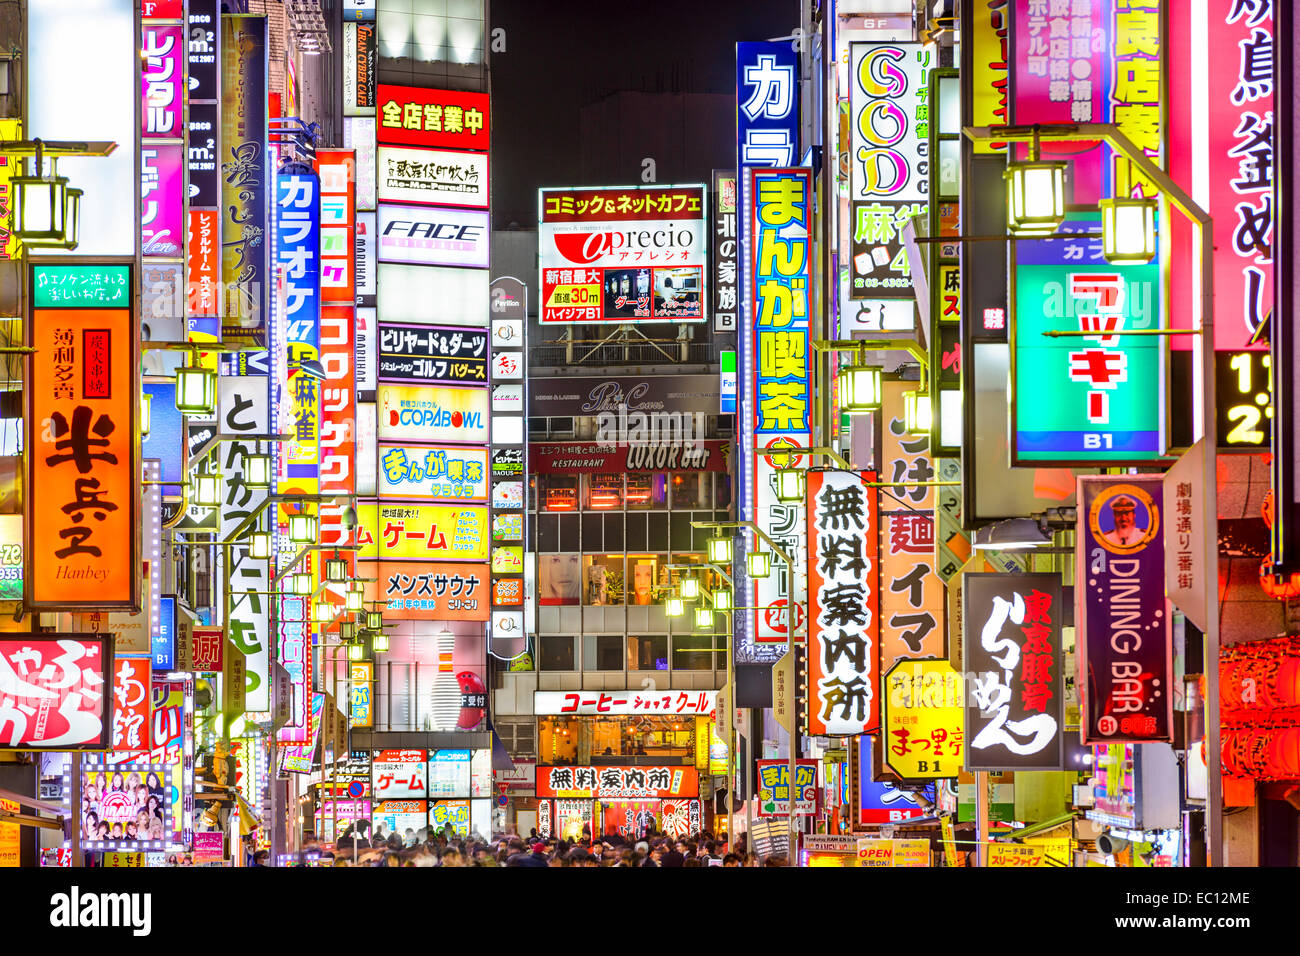 TOKYO, JAPAN - MARCH 14, 2014: Signs densely line an alleyway in Kabuki-cho. The area is a renown nightlife and red-light distri Stock Photo